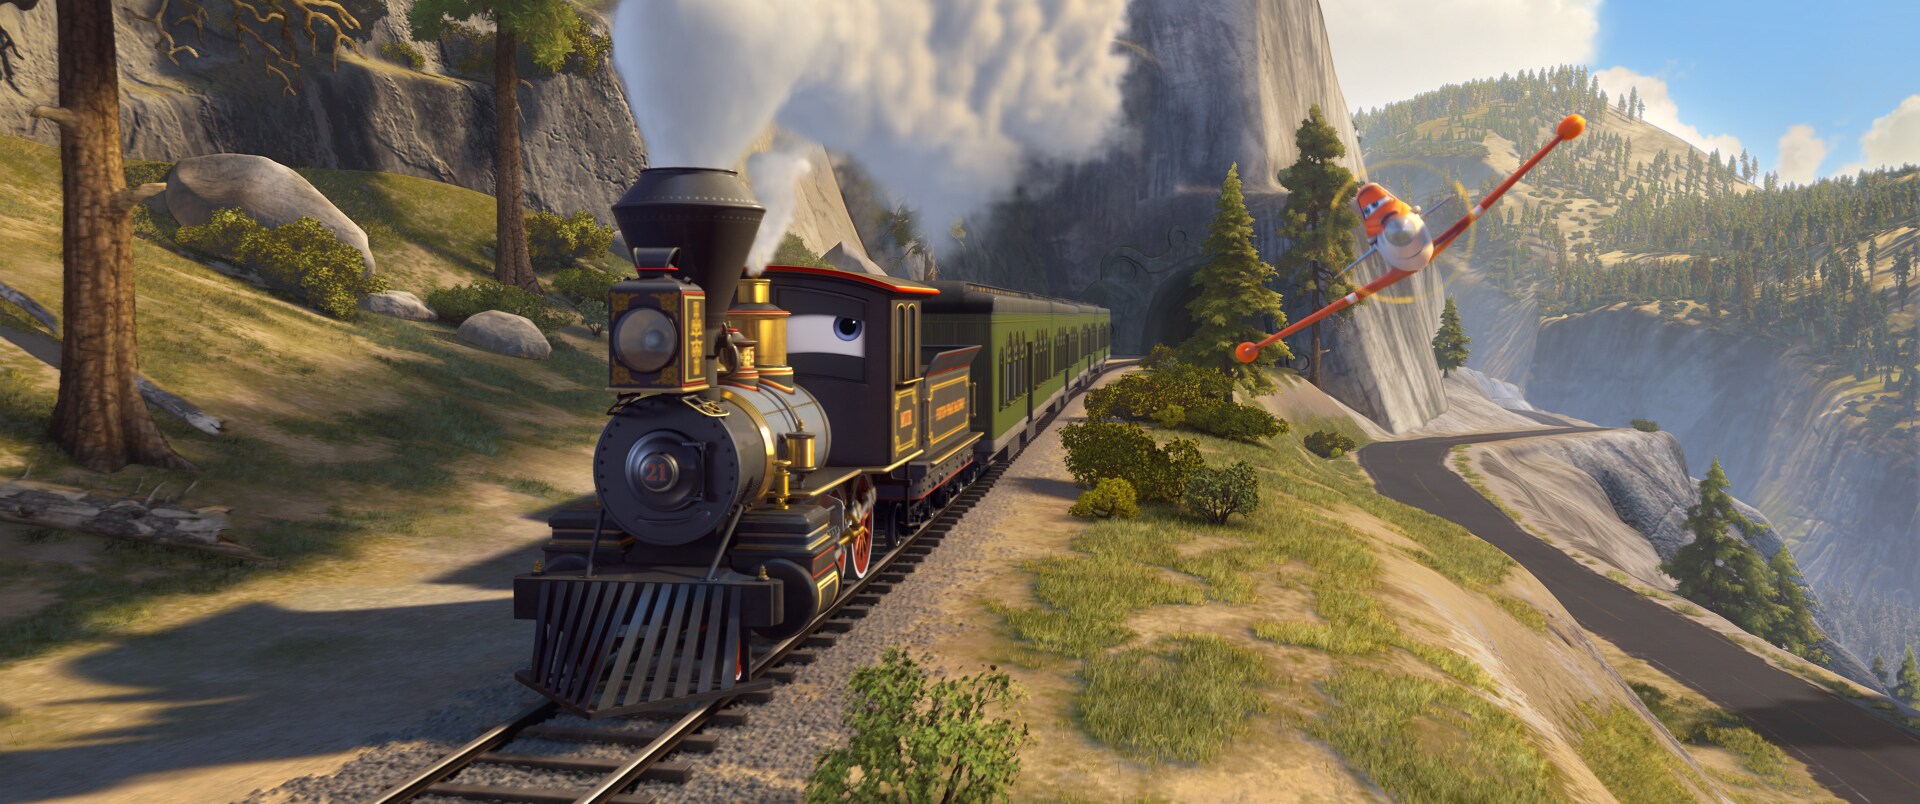 Dusty (Dane Cook) flying beside a train in the movie "Planes: Fire & Rescue"